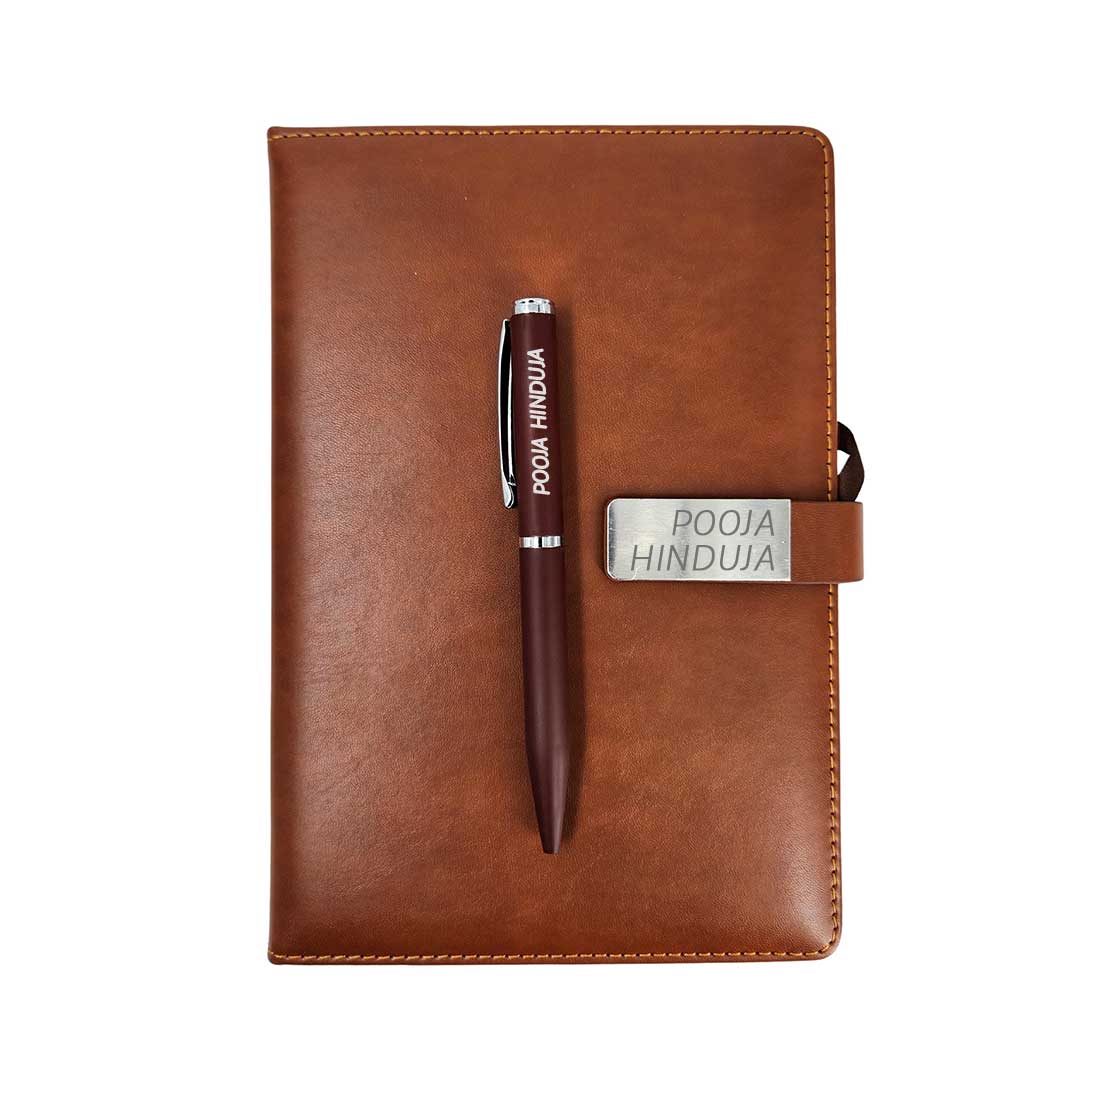 Corporate Gift Set Diary and Pen